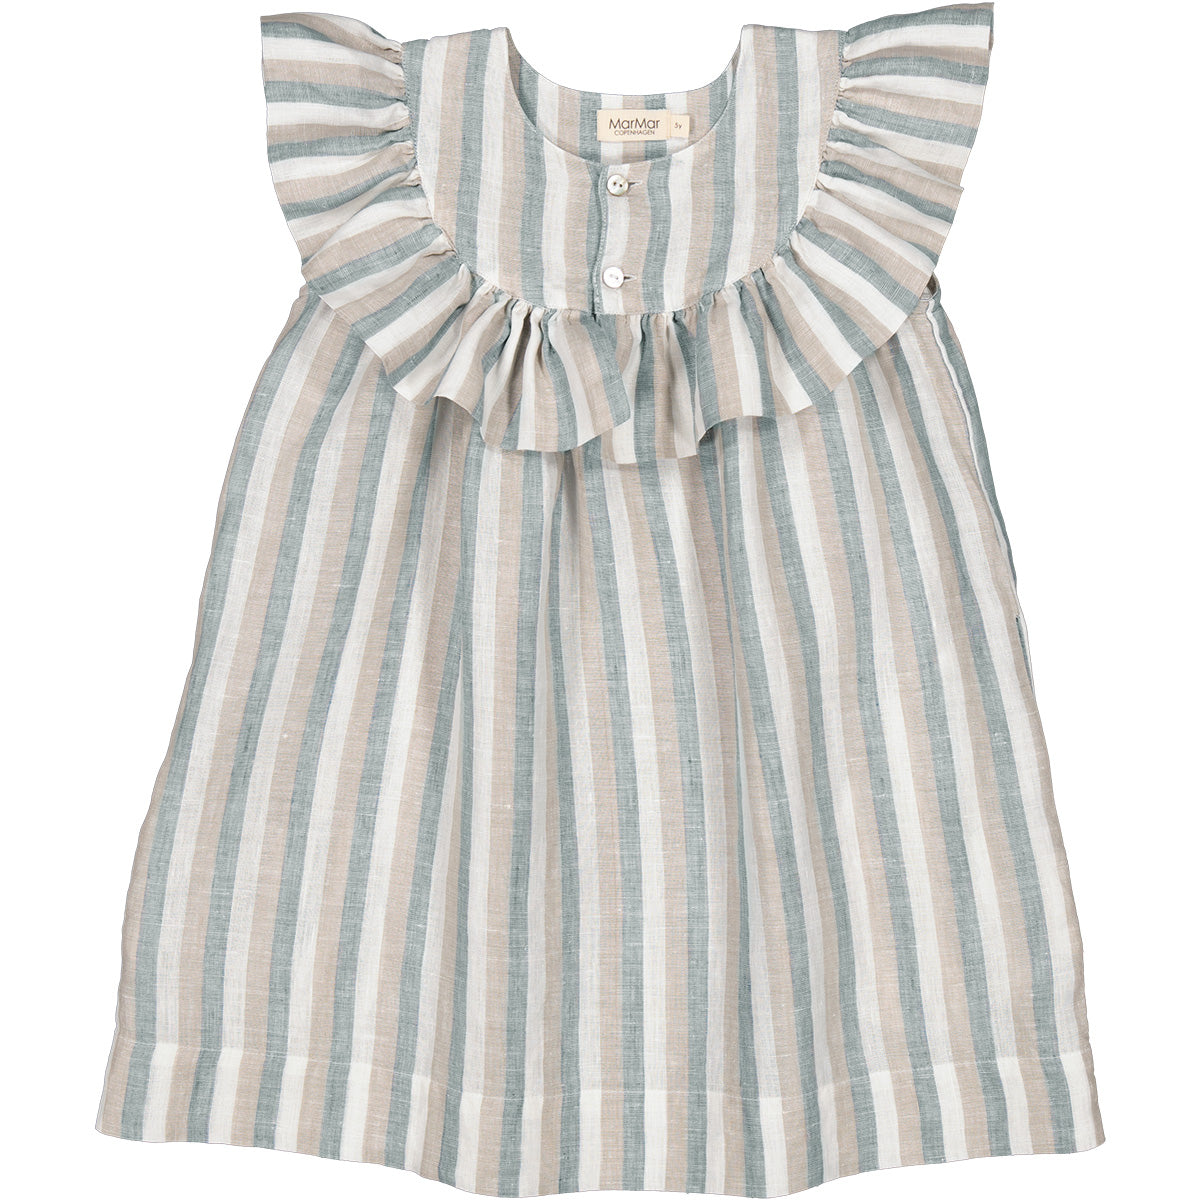 The Drussa Dress from MarMar Copenhagen. Short-sleeved dress with frill details and button closure